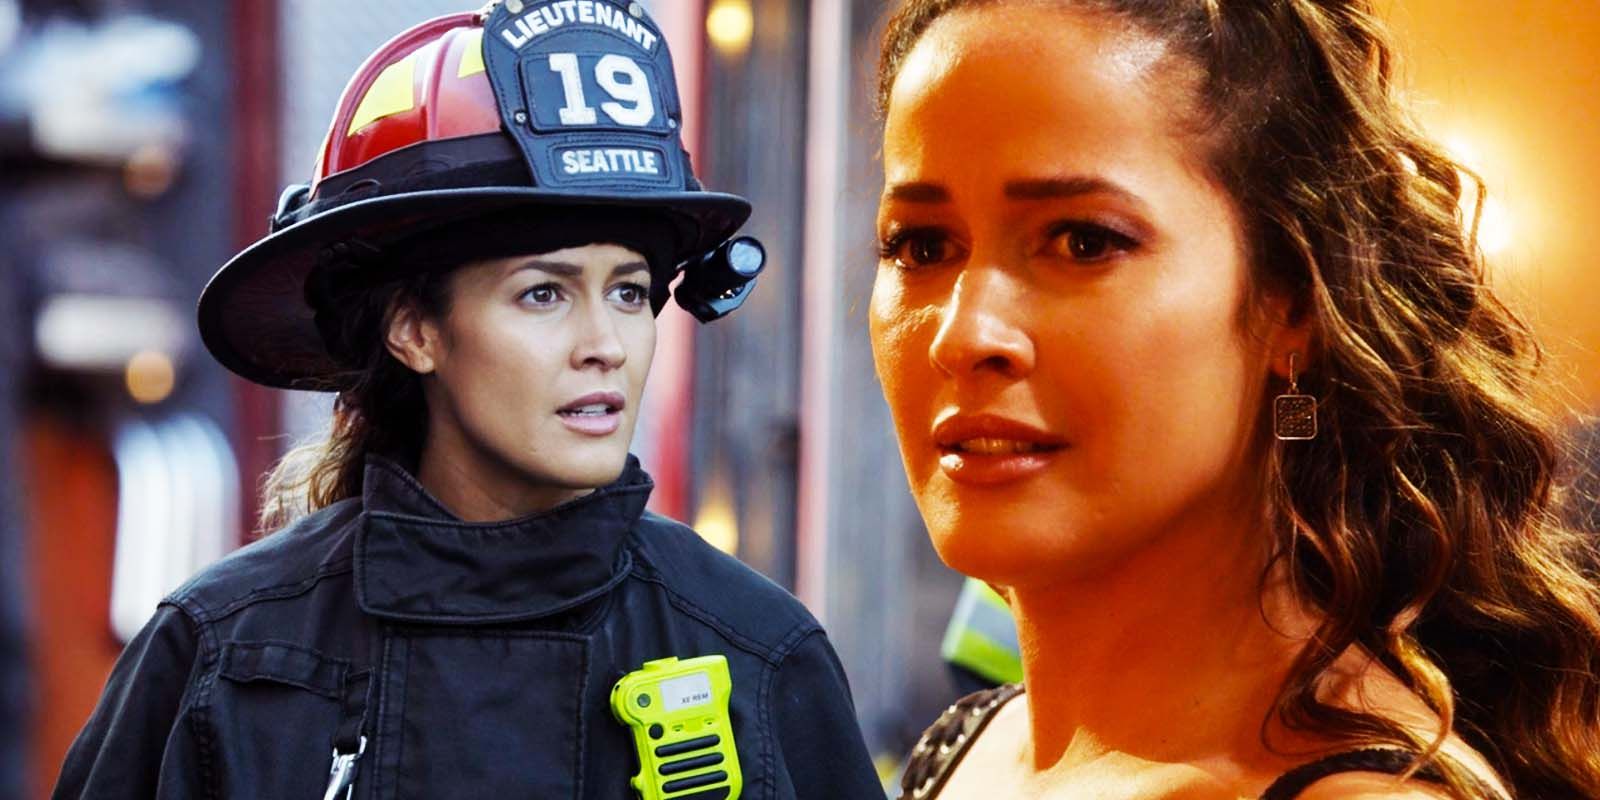 Station 19 Season 7: Release Date, Cast, Story & Everything We Know